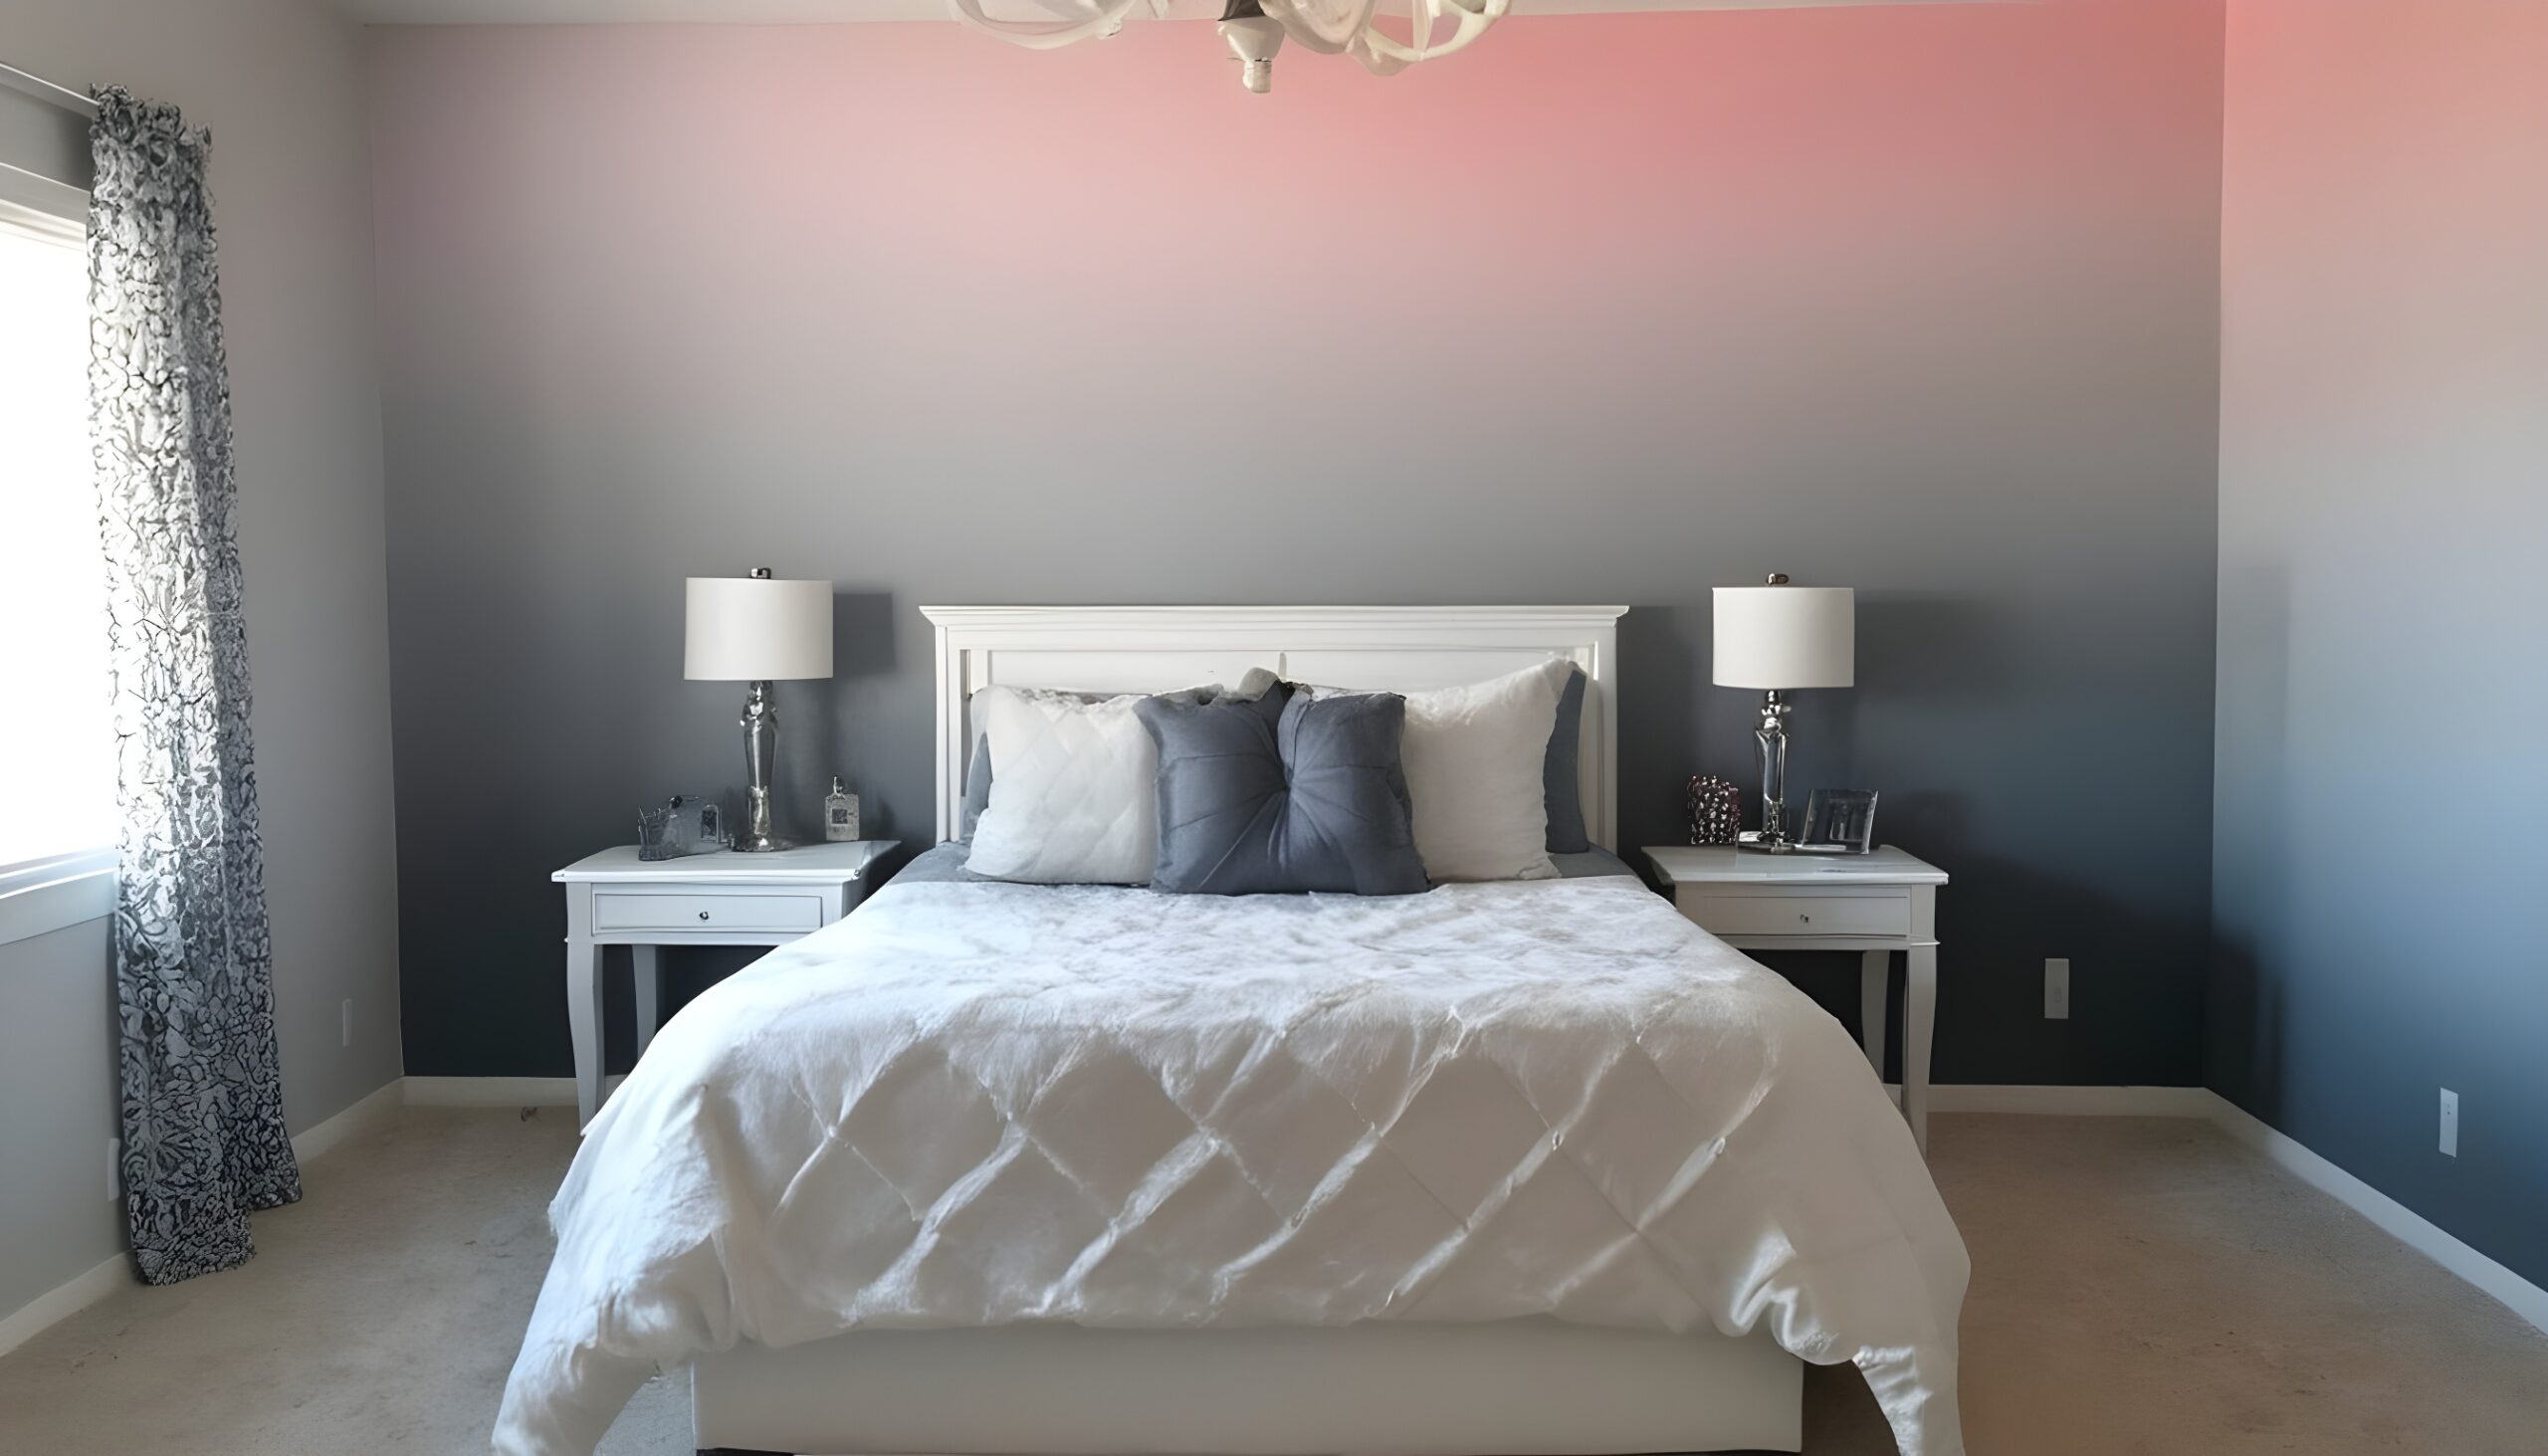 ombre effect wall paint